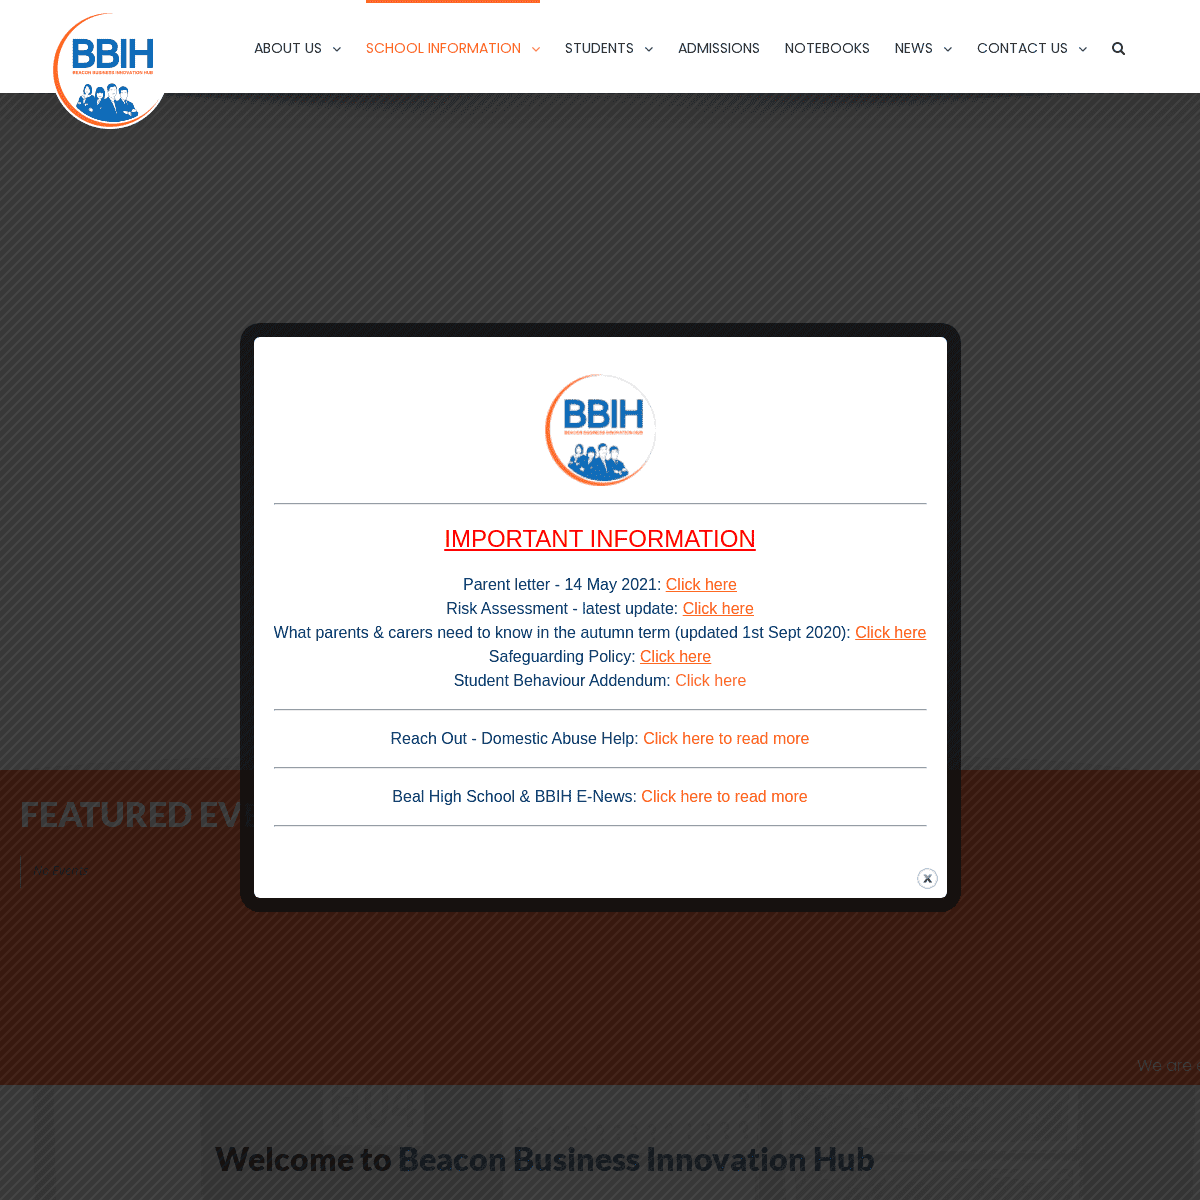 A complete backup of https://bbih.org